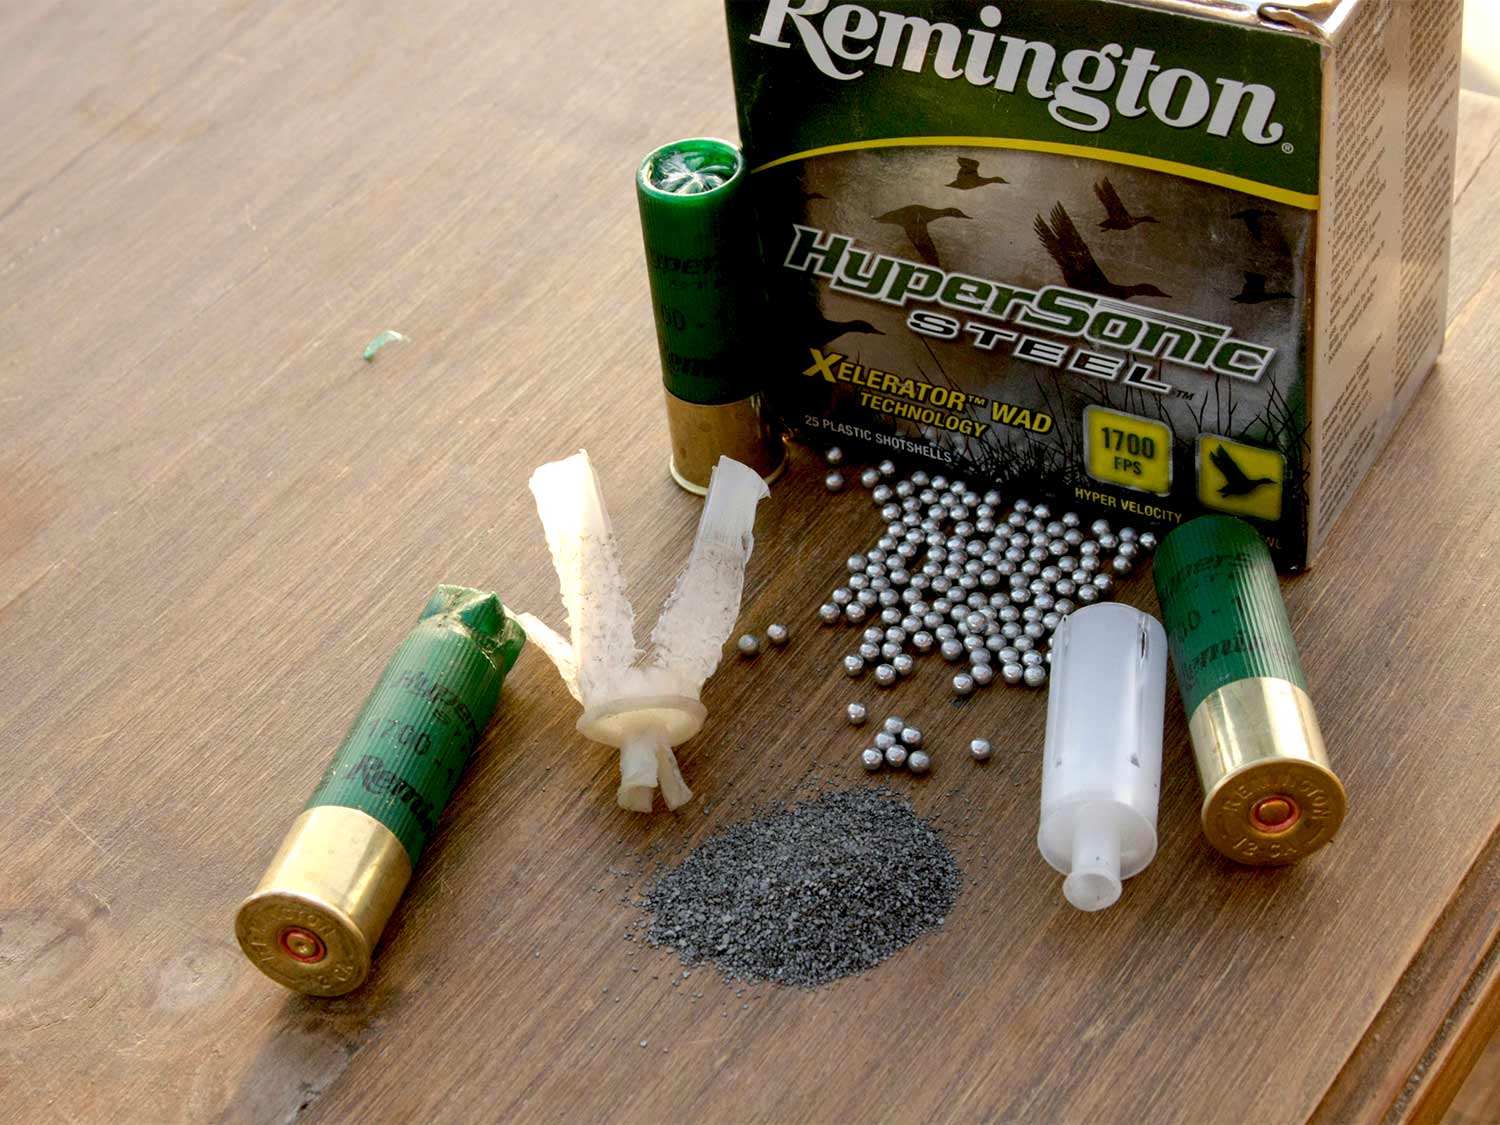 A dissected 12-gauge waterfowl load.